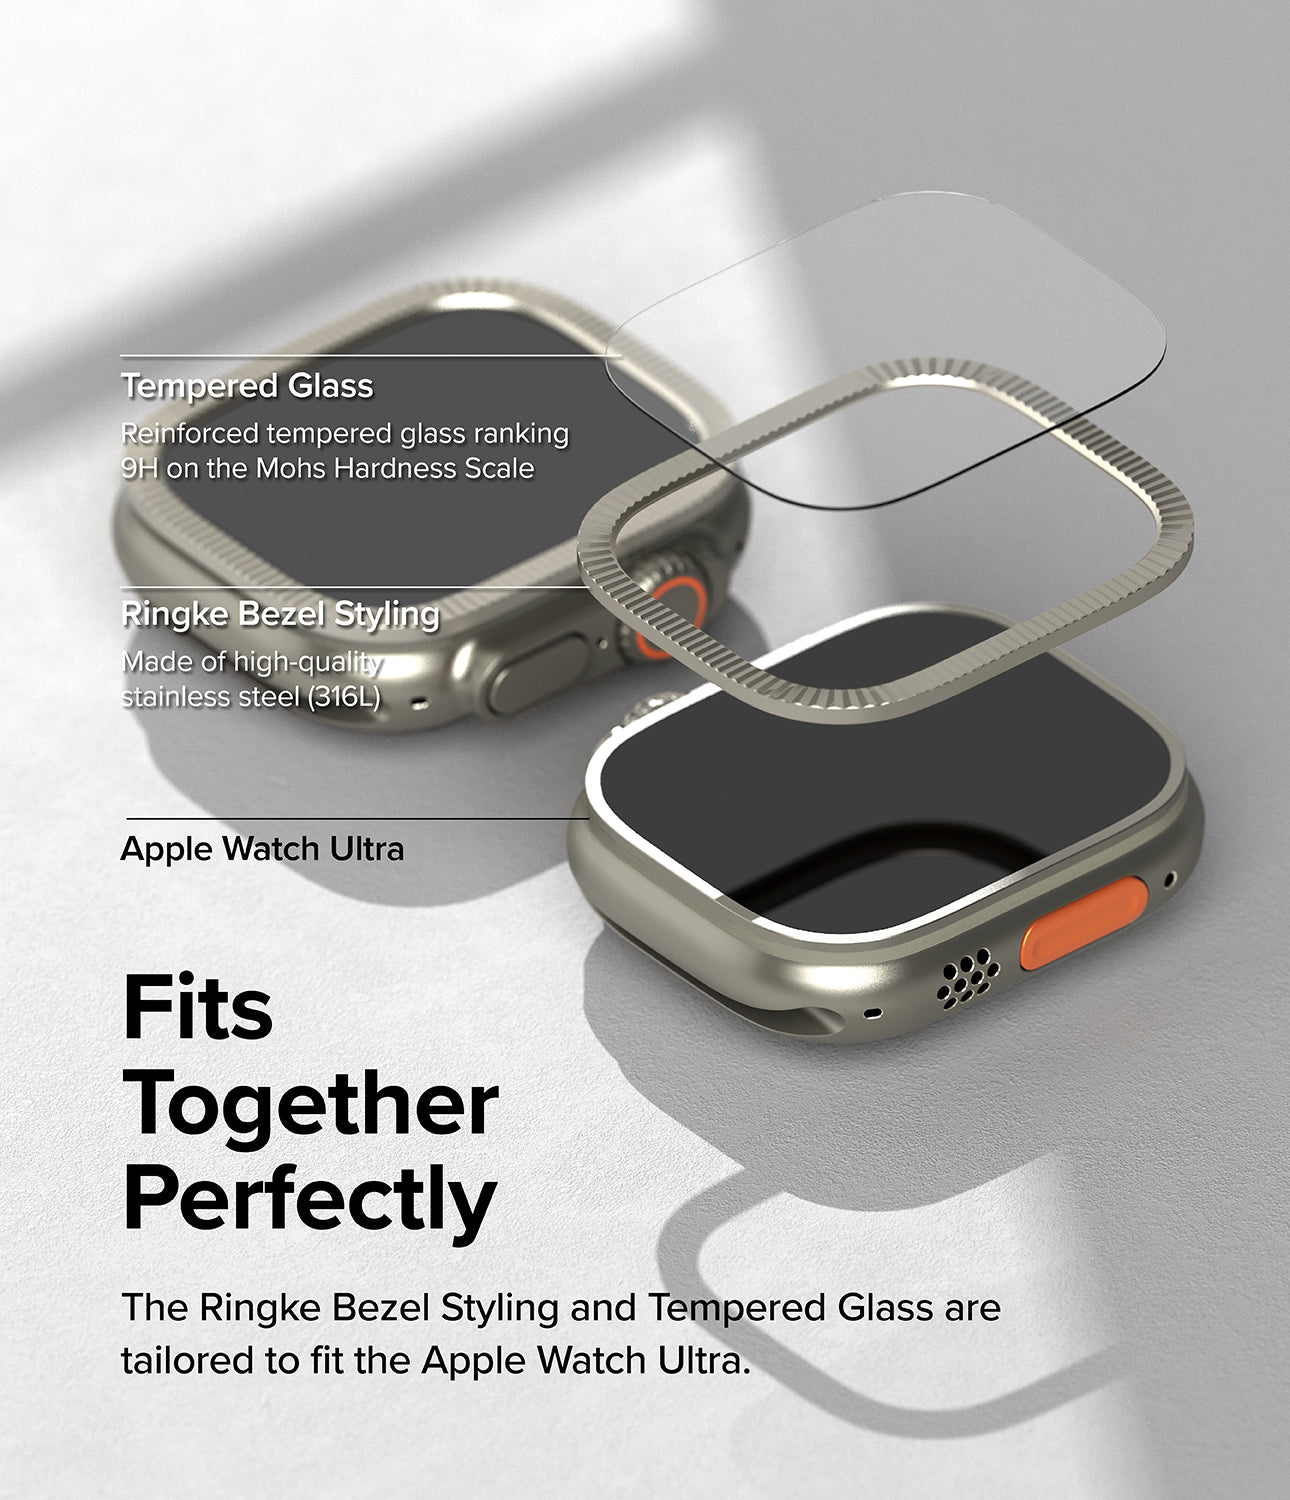 Apple Watch Ultra 2 / 1 | Glass + Bezel Styling 49-44 (ST) - Fits Together Perfectly. The Ringke Bezel Styling and Tempered Glass are tailored to fit the Apple Watch Ultra